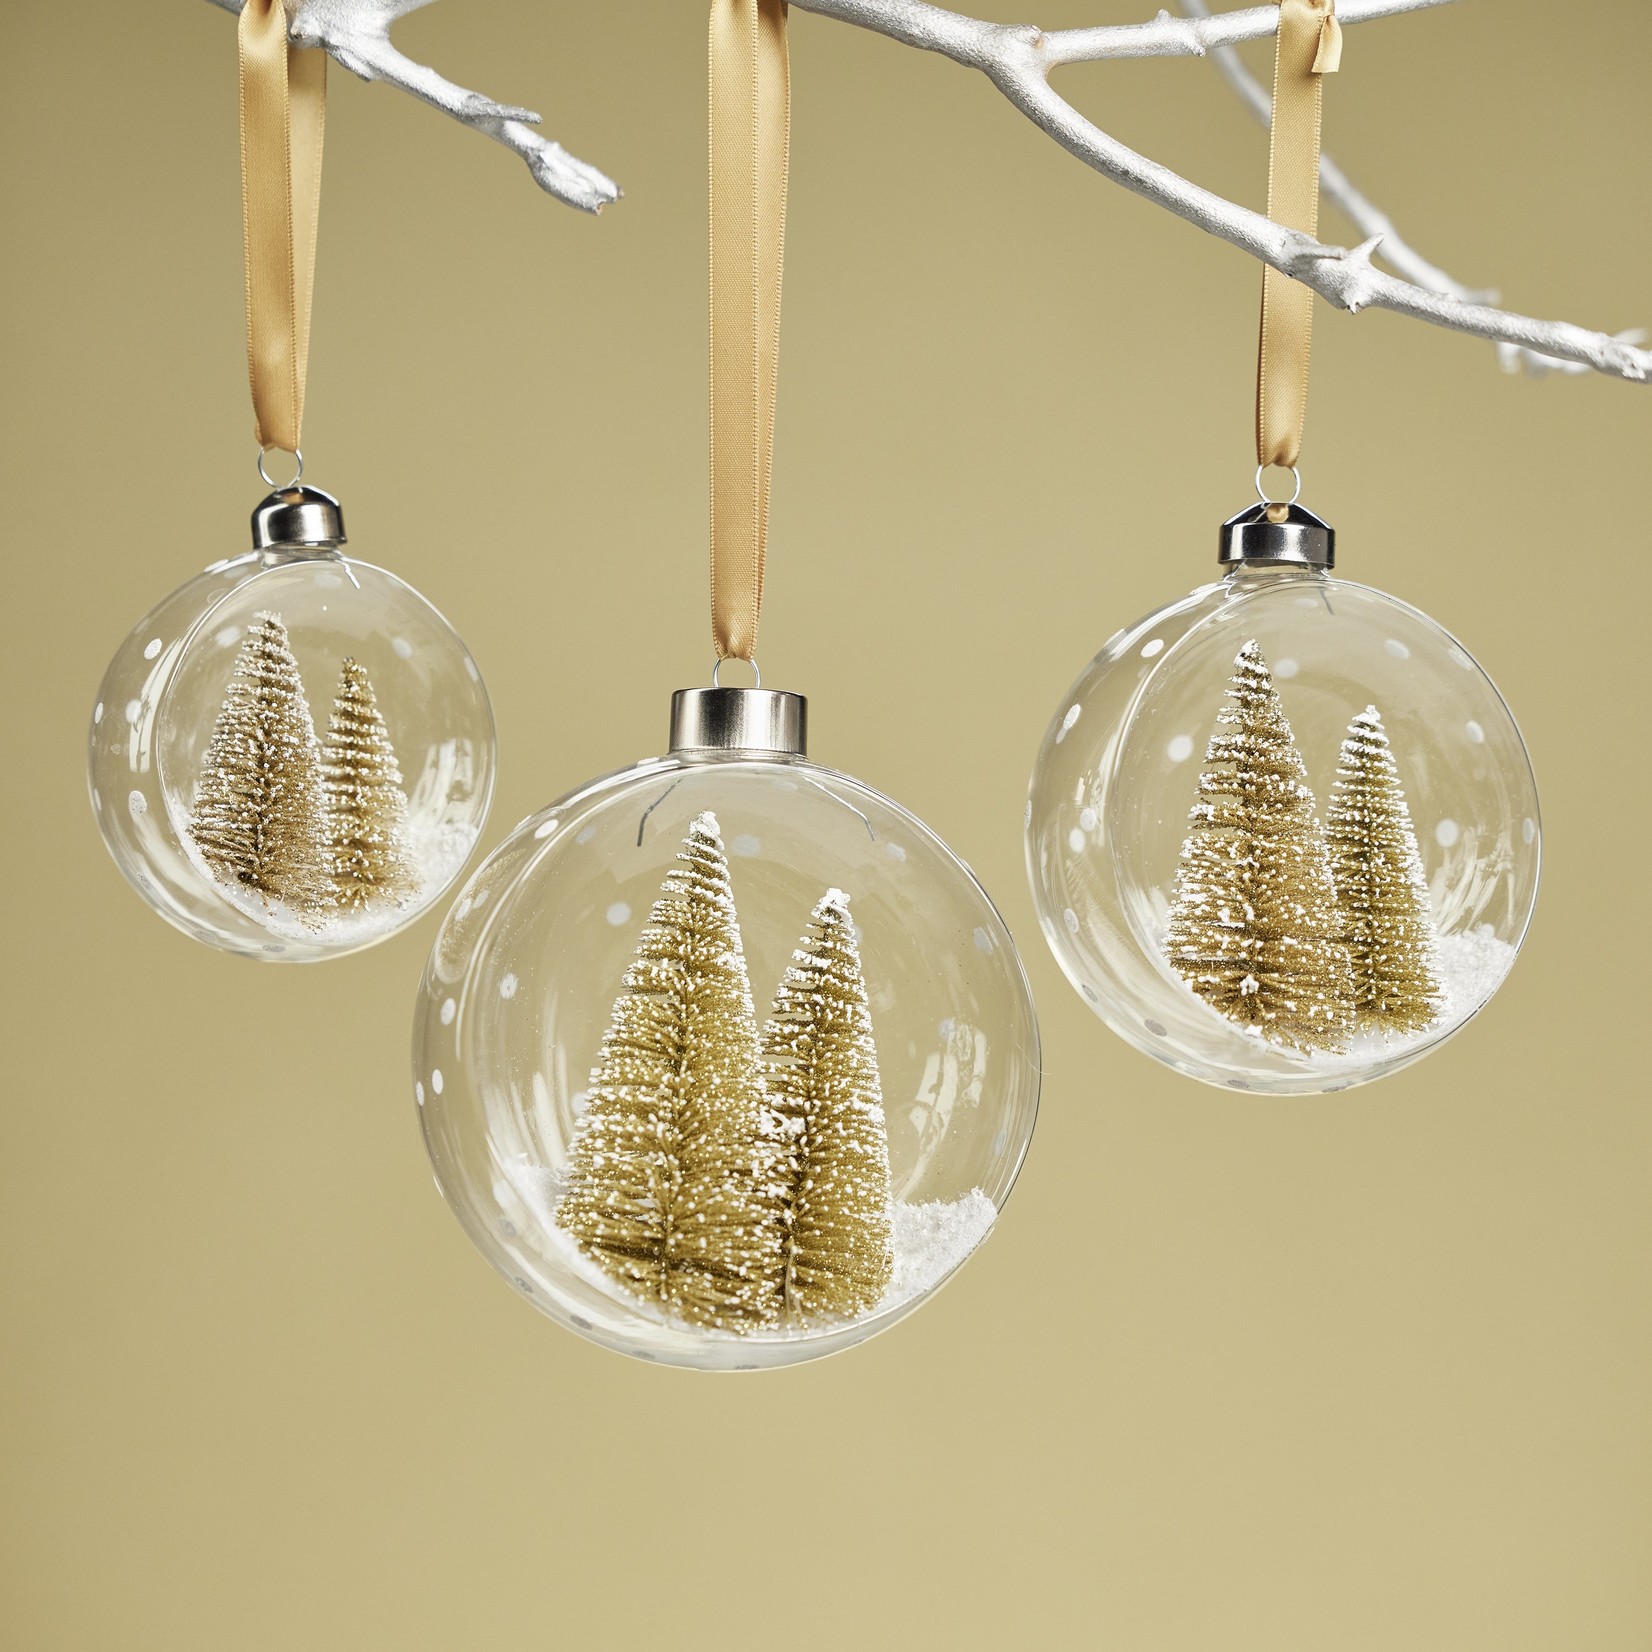 Zodax Clear Glass Ornament with Pine Trees